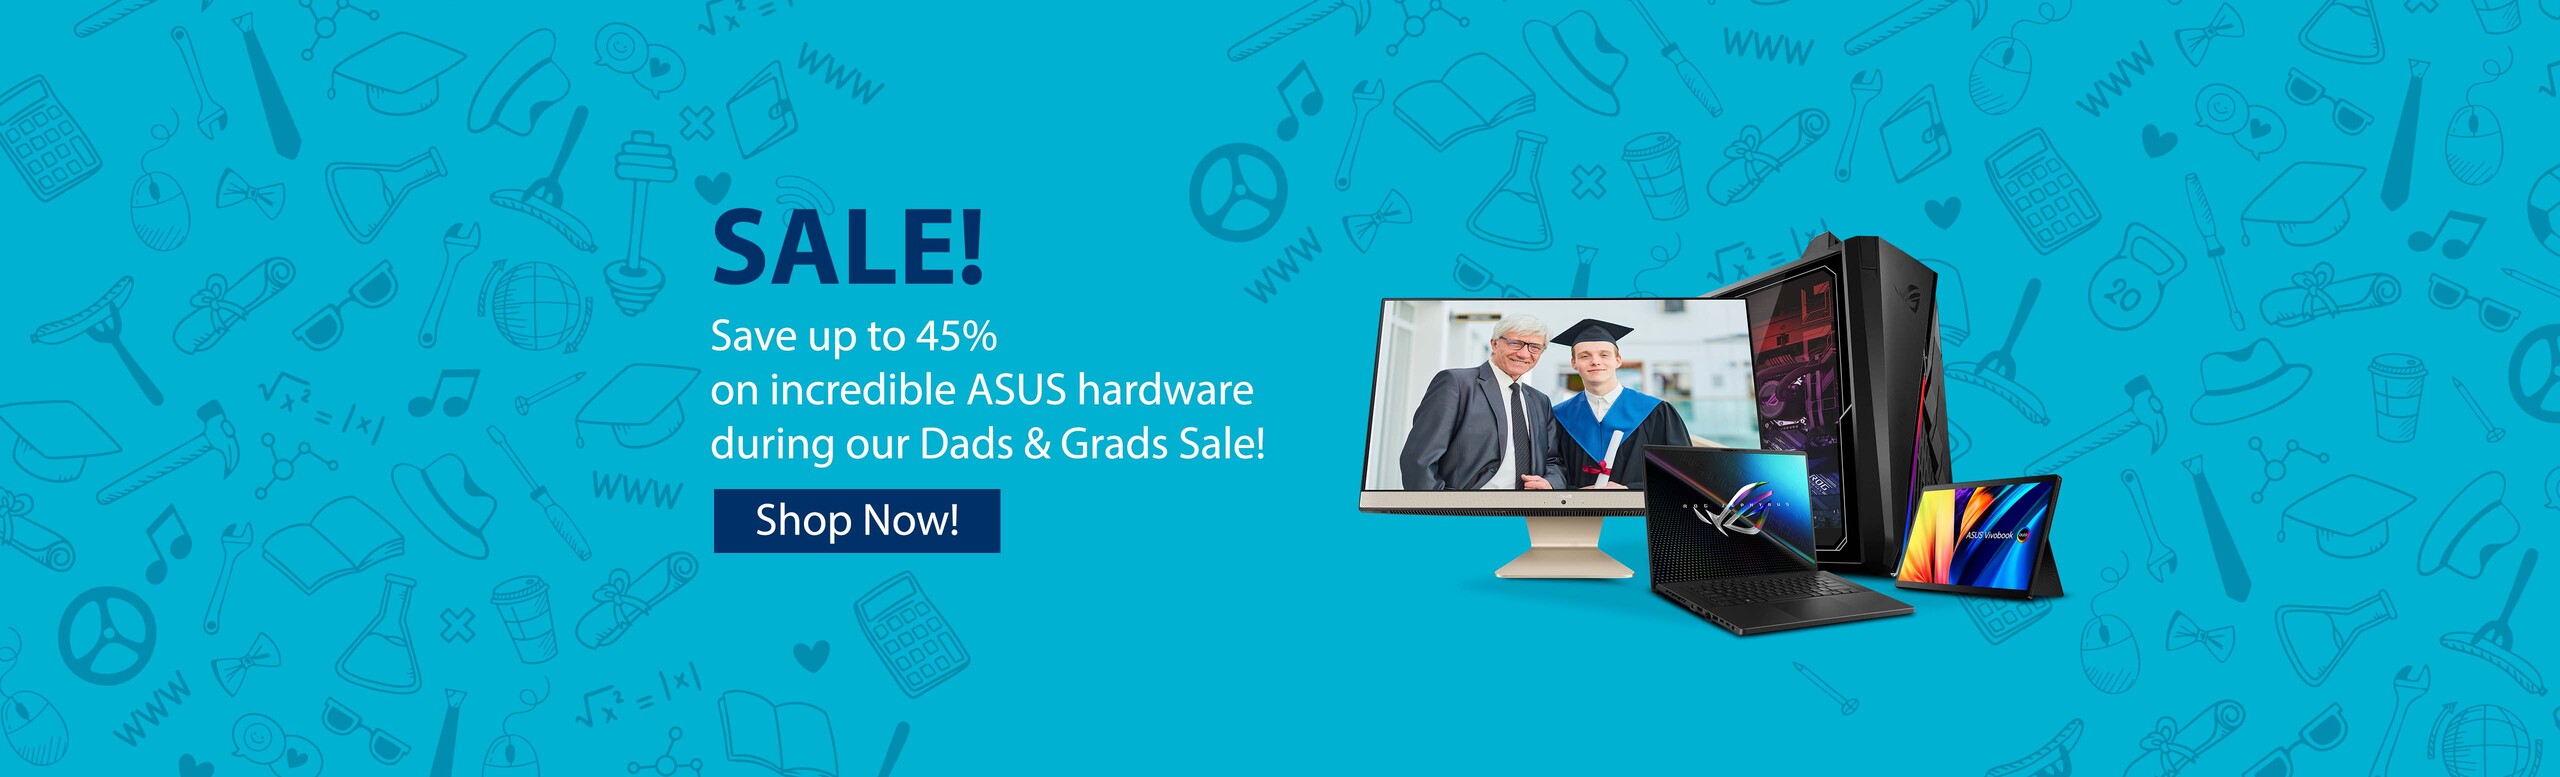 Save up to 43% on incredible ASUS hardware during our Dads and Grads Sale!